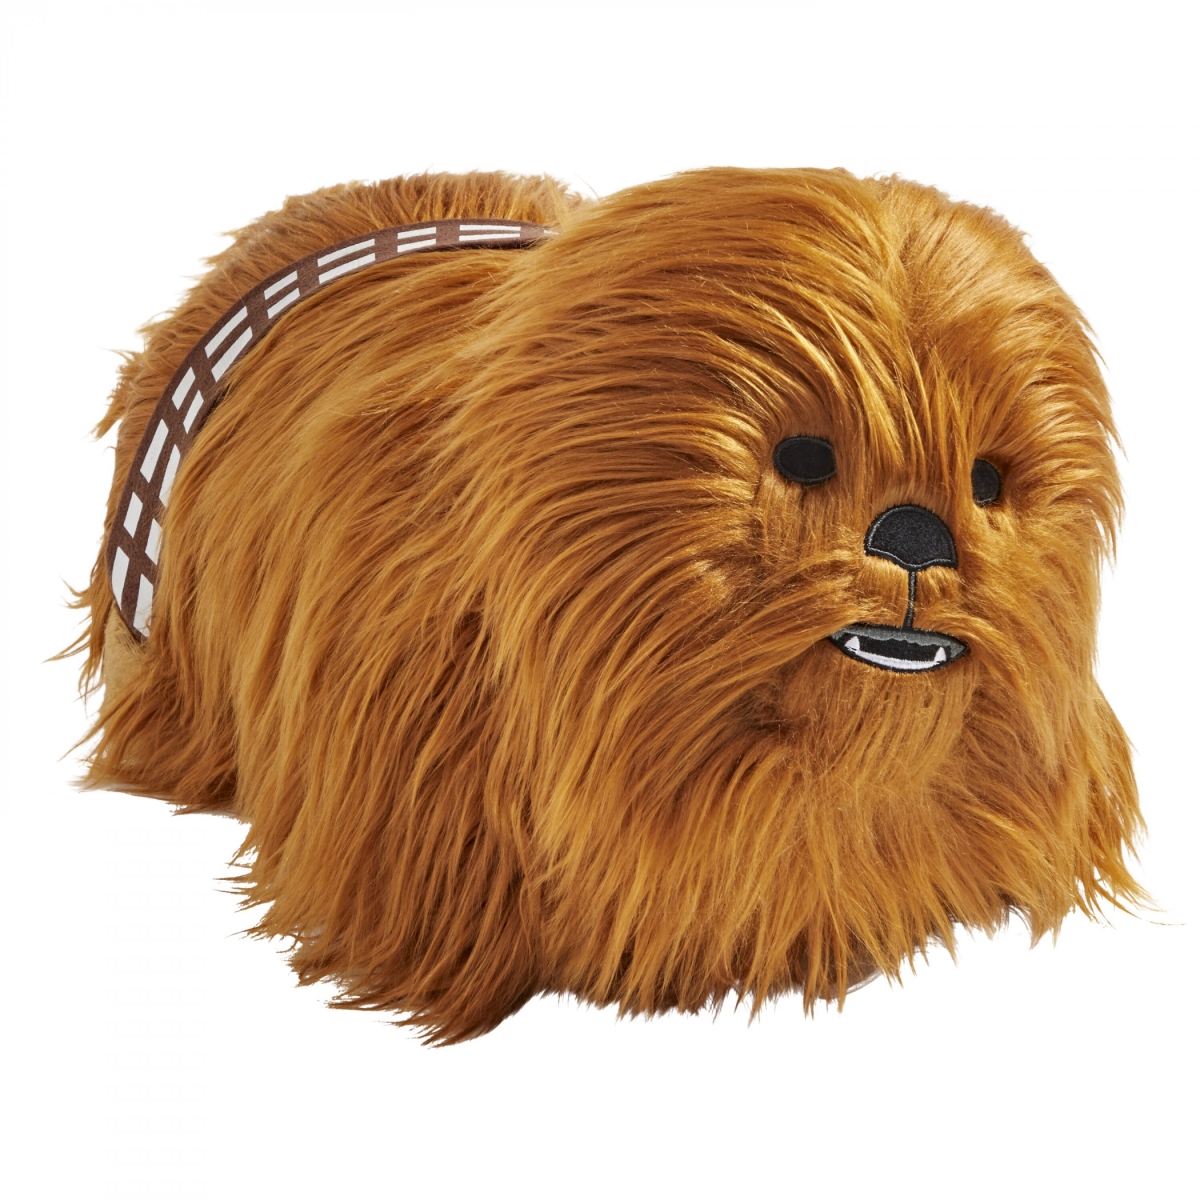 Picture of Star Wars 808059 Chewy Pillow Pet Chewbacca Stuffed Animal Plush Toy